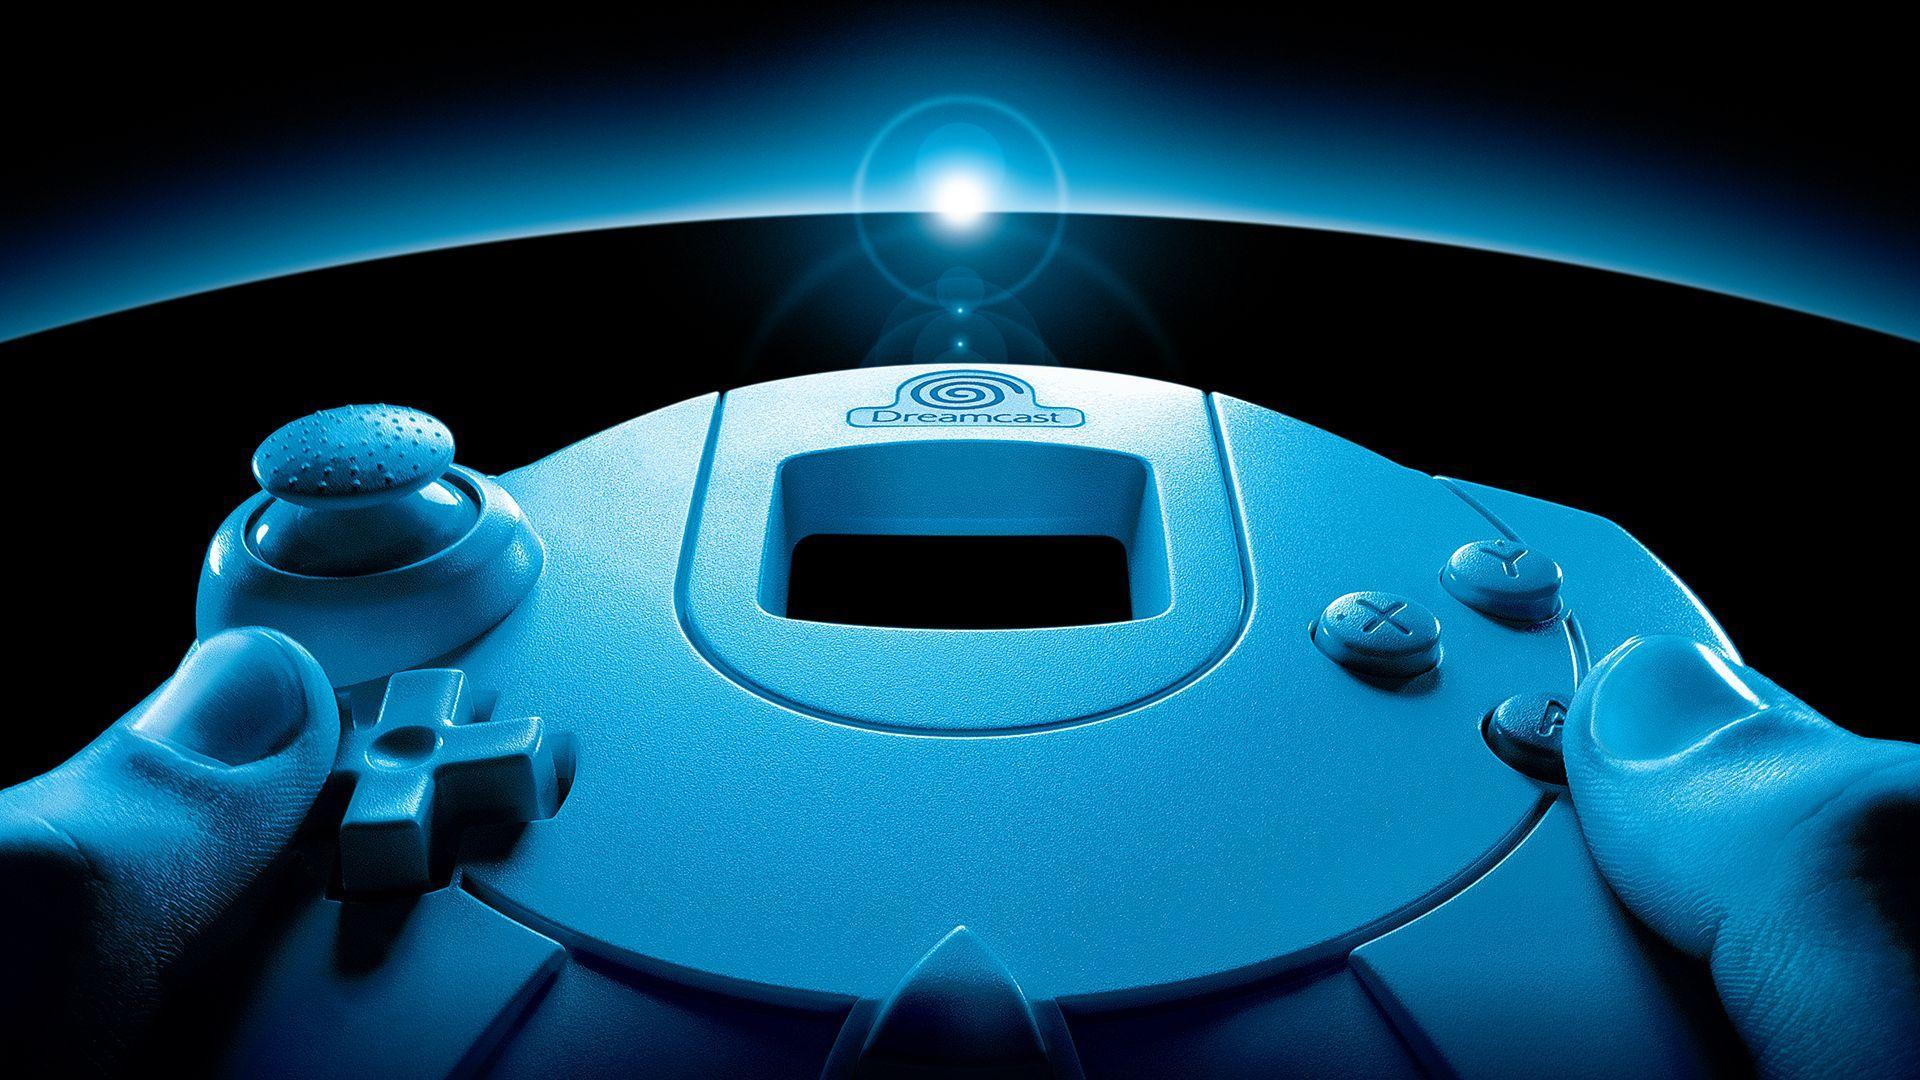 Sega wallpapers for desktop download free Sega pictures and backgrounds  for PC  moborg